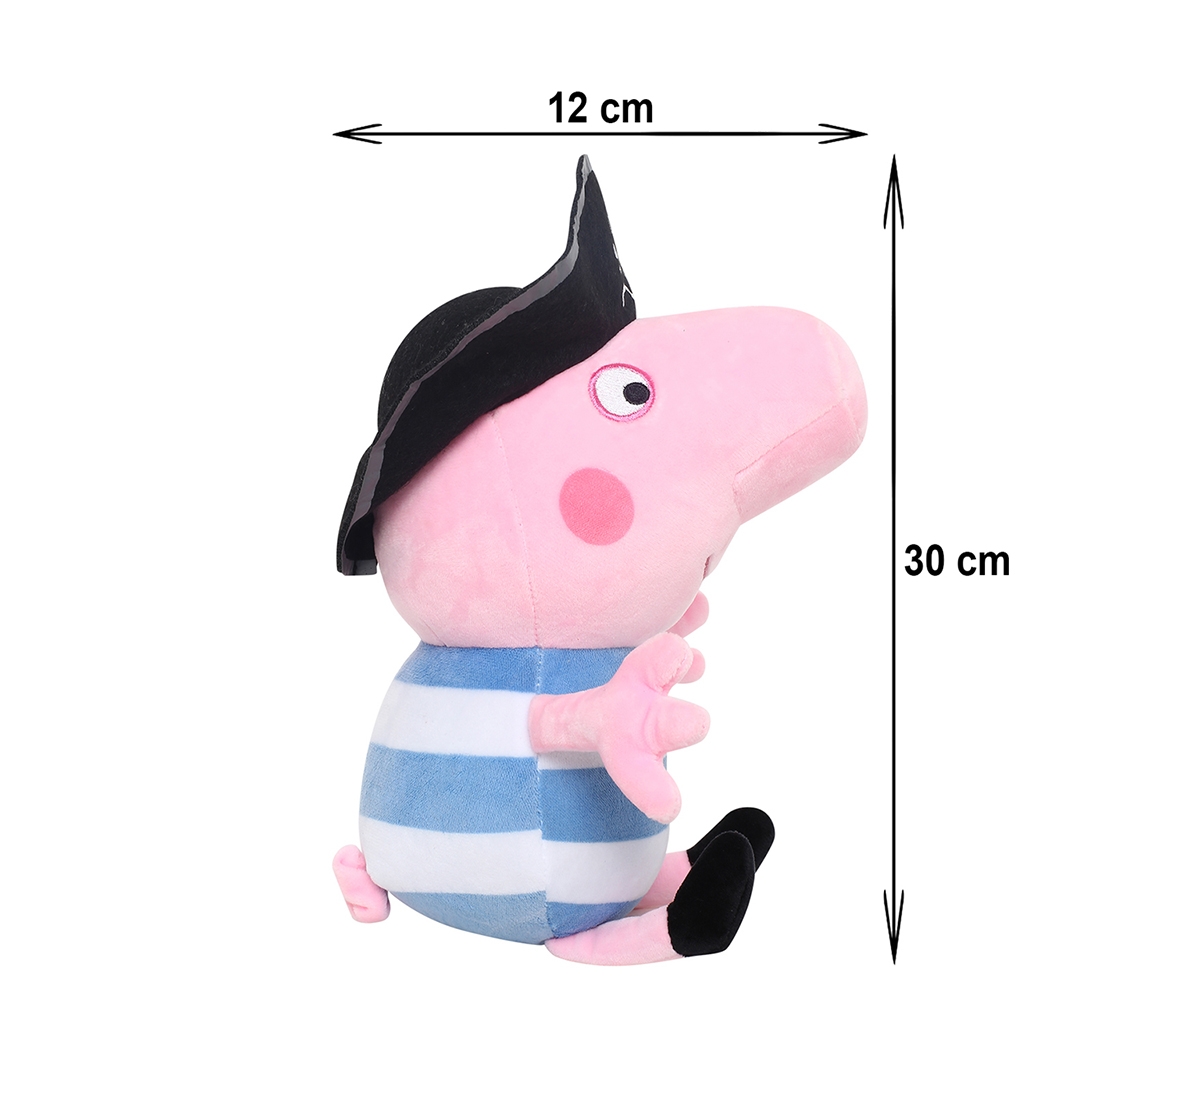 Peppa Pig | Peppa Pig In Pirate Costume Multi Color 30 Cm Soft Toy for Kids age 3Y+ - 30 Cm 6